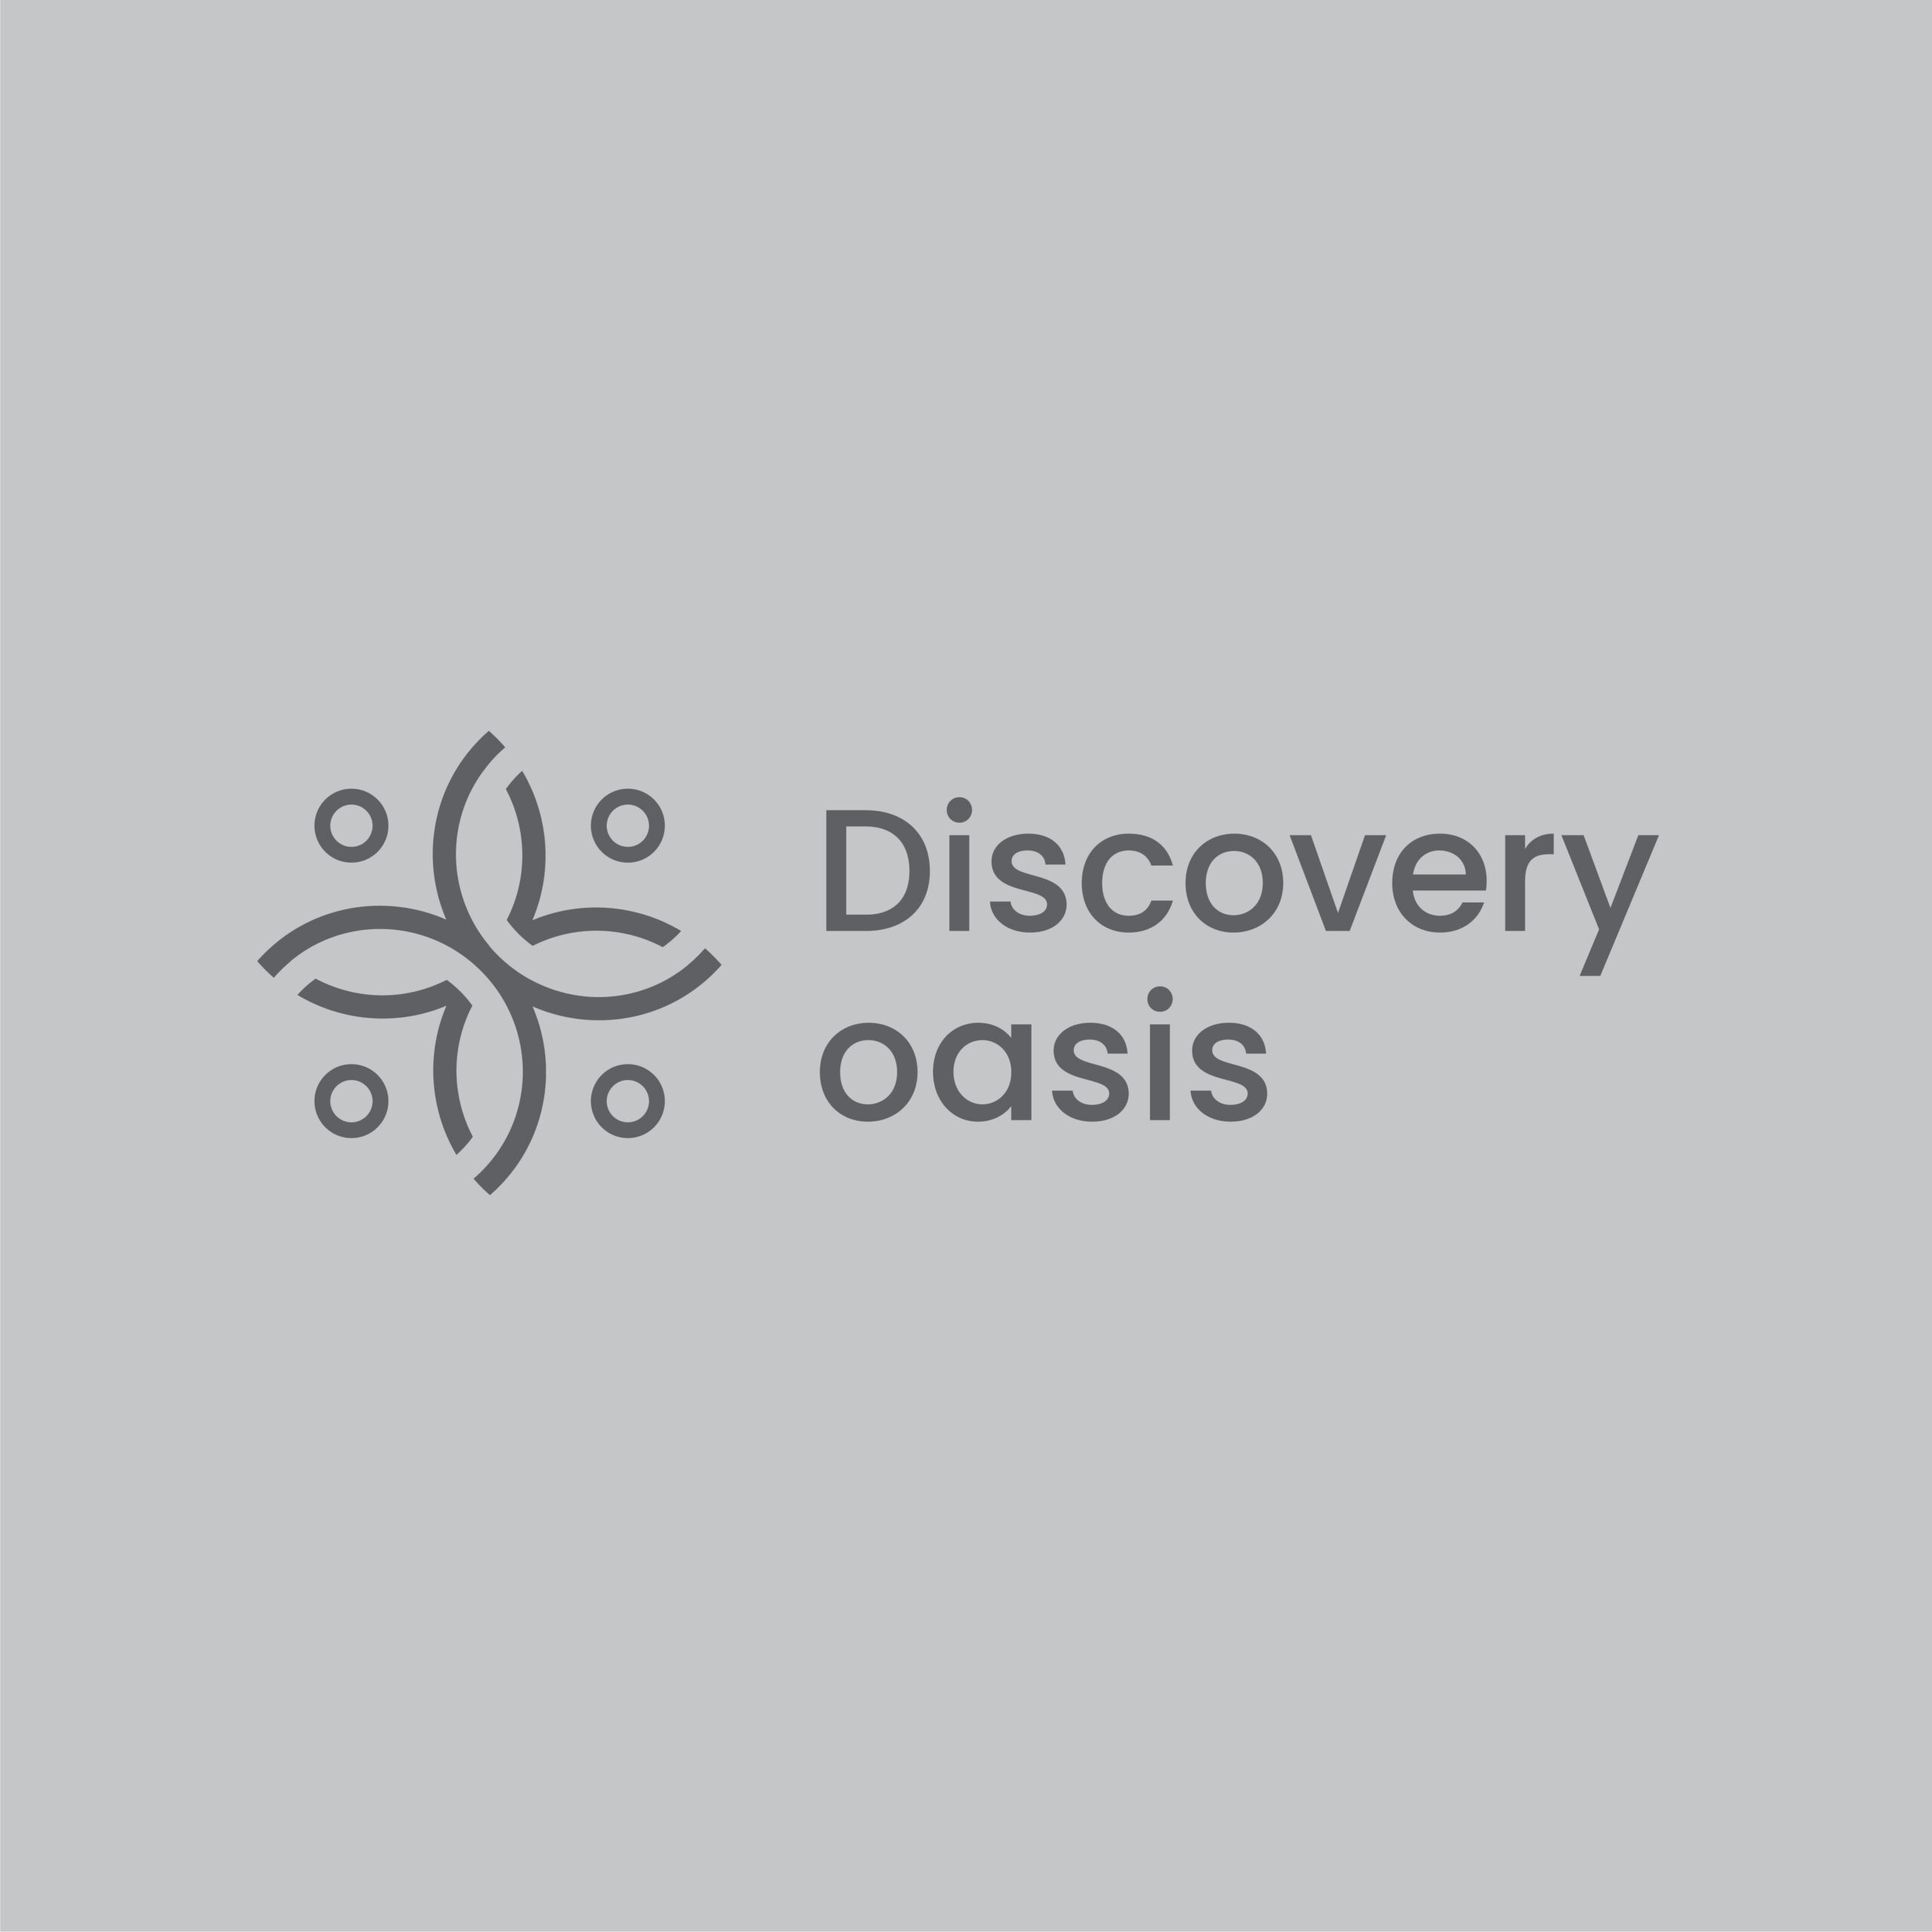 Discovery-oasis-logo-variations-03